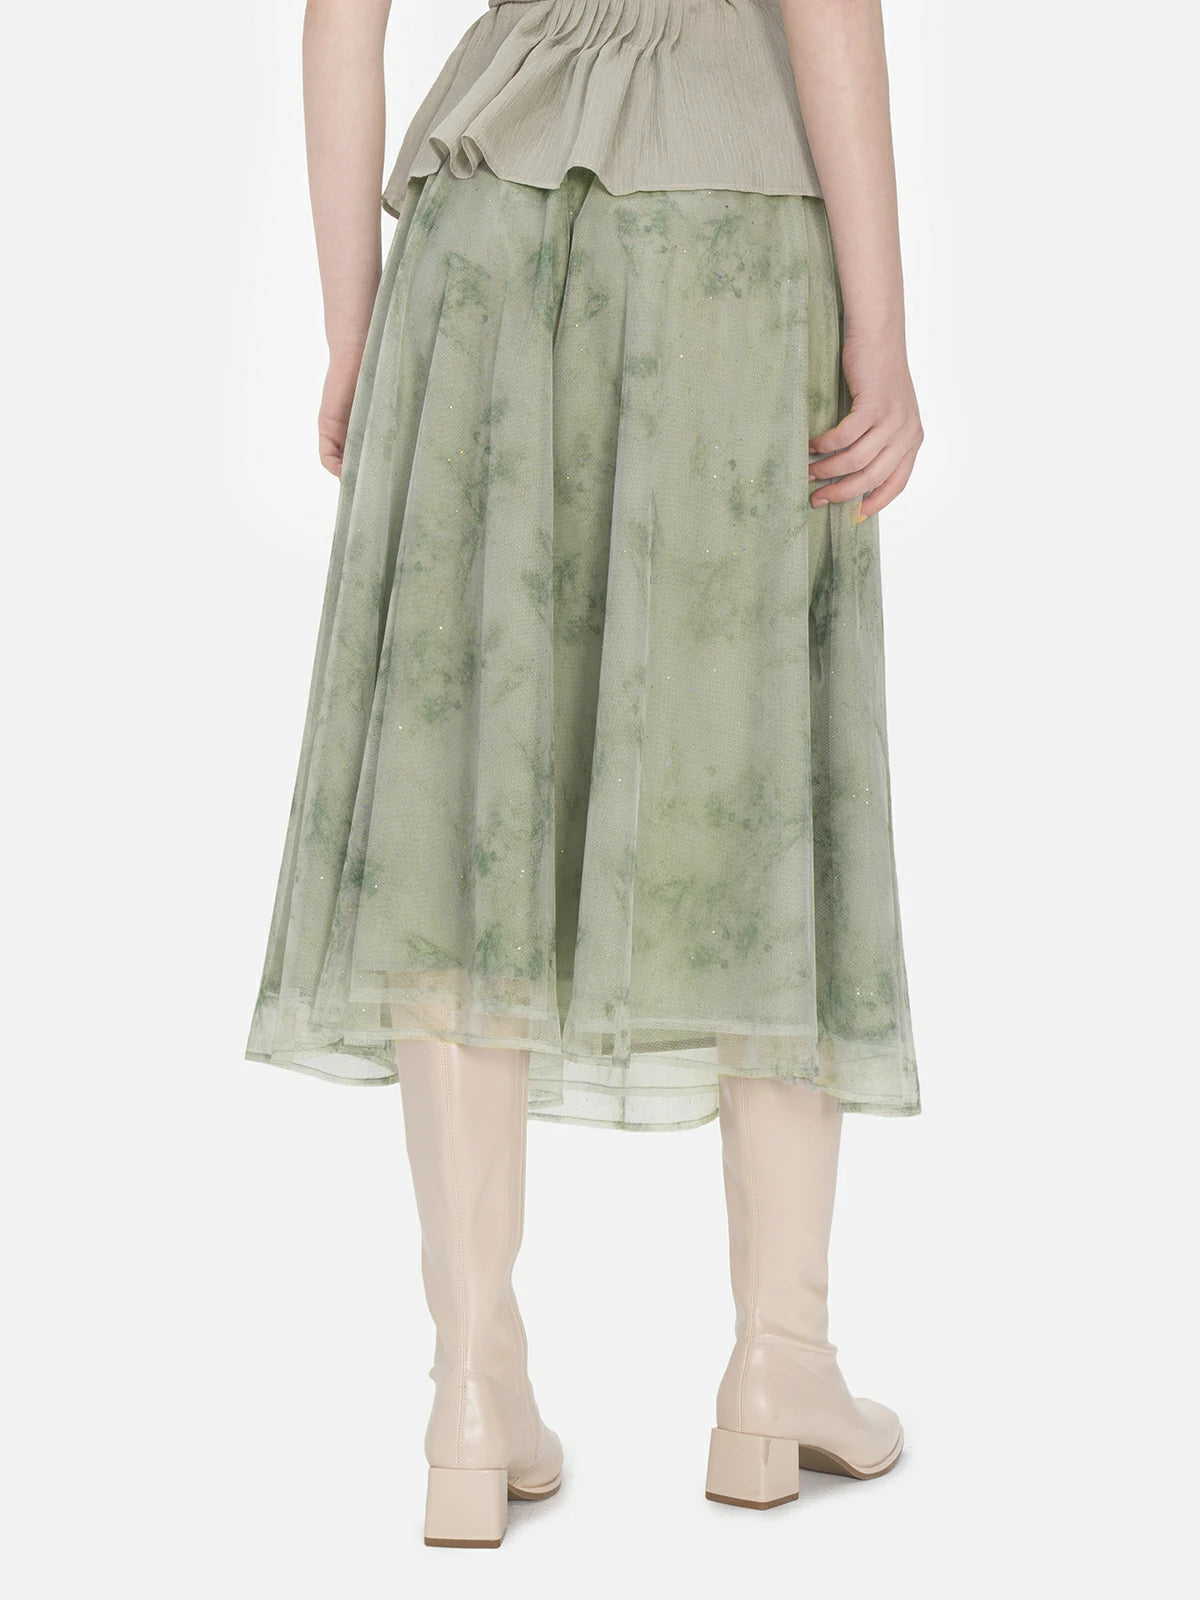 Elegant A-line midi skirt in green with an elastic waistband, crafted from sheer mesh fabric showcasing subtle and delicate floral prints, creating a mysterious and feminine allure.